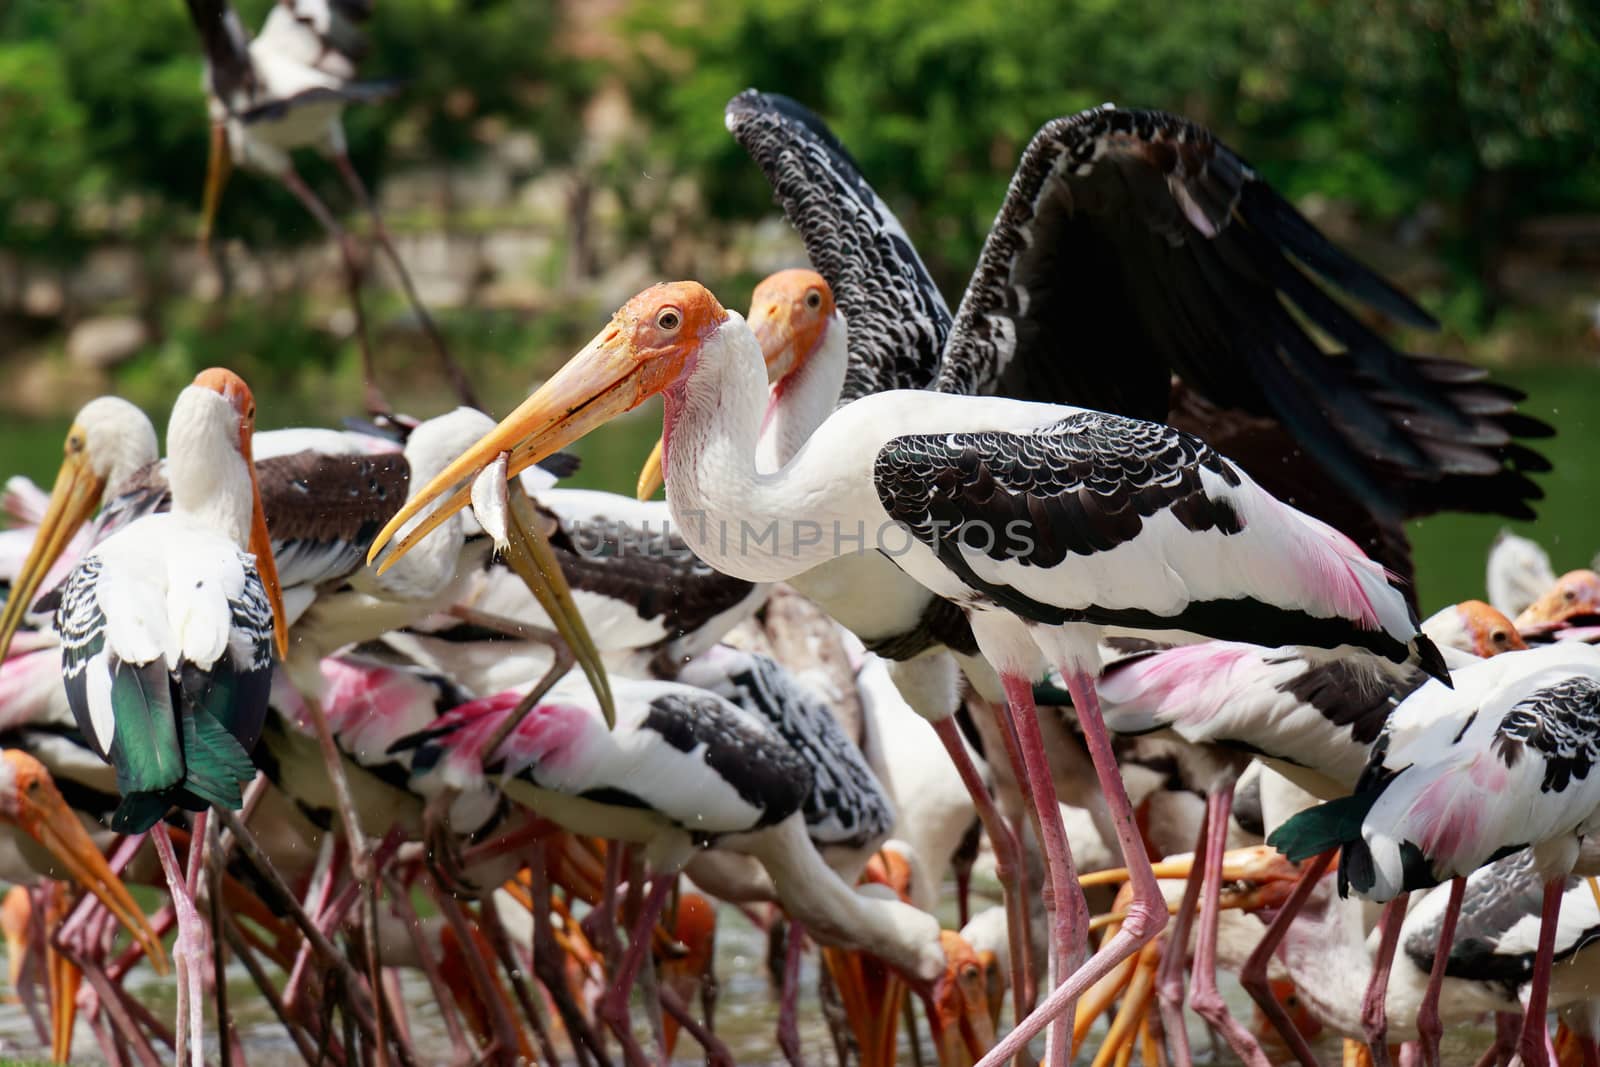 Group of pelicans catch fish from lake river. Pelican bird wallpaper , background